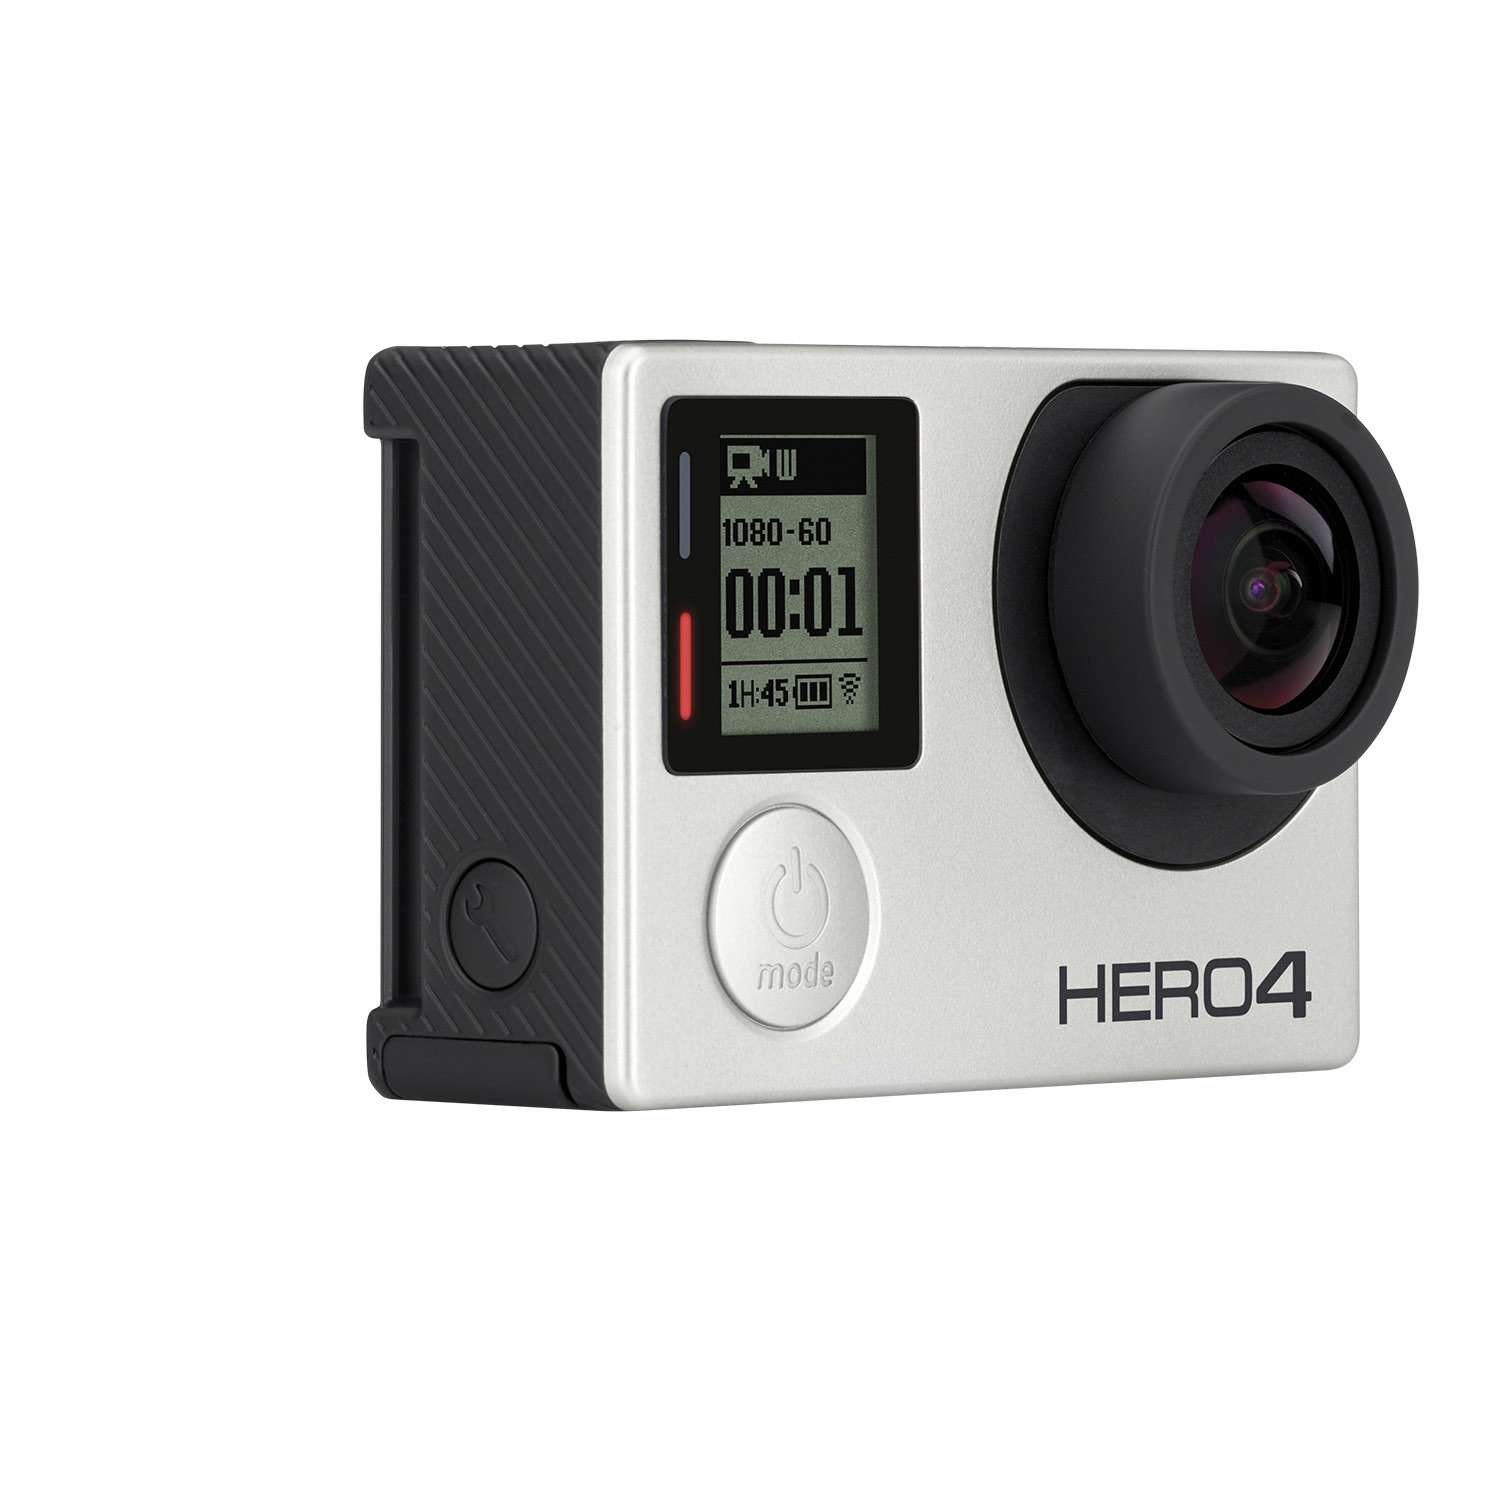 <B>GOPRO HERO 4 SILVER</b>
The camera that changed the way we document our fishing trips has just made the experience even easier with this new camera. The Hero 4 Silver has a built-in touch display. So, now you can control the camera, play back footage and adjust settings by simply tapping and swiping at the screen on the back. 